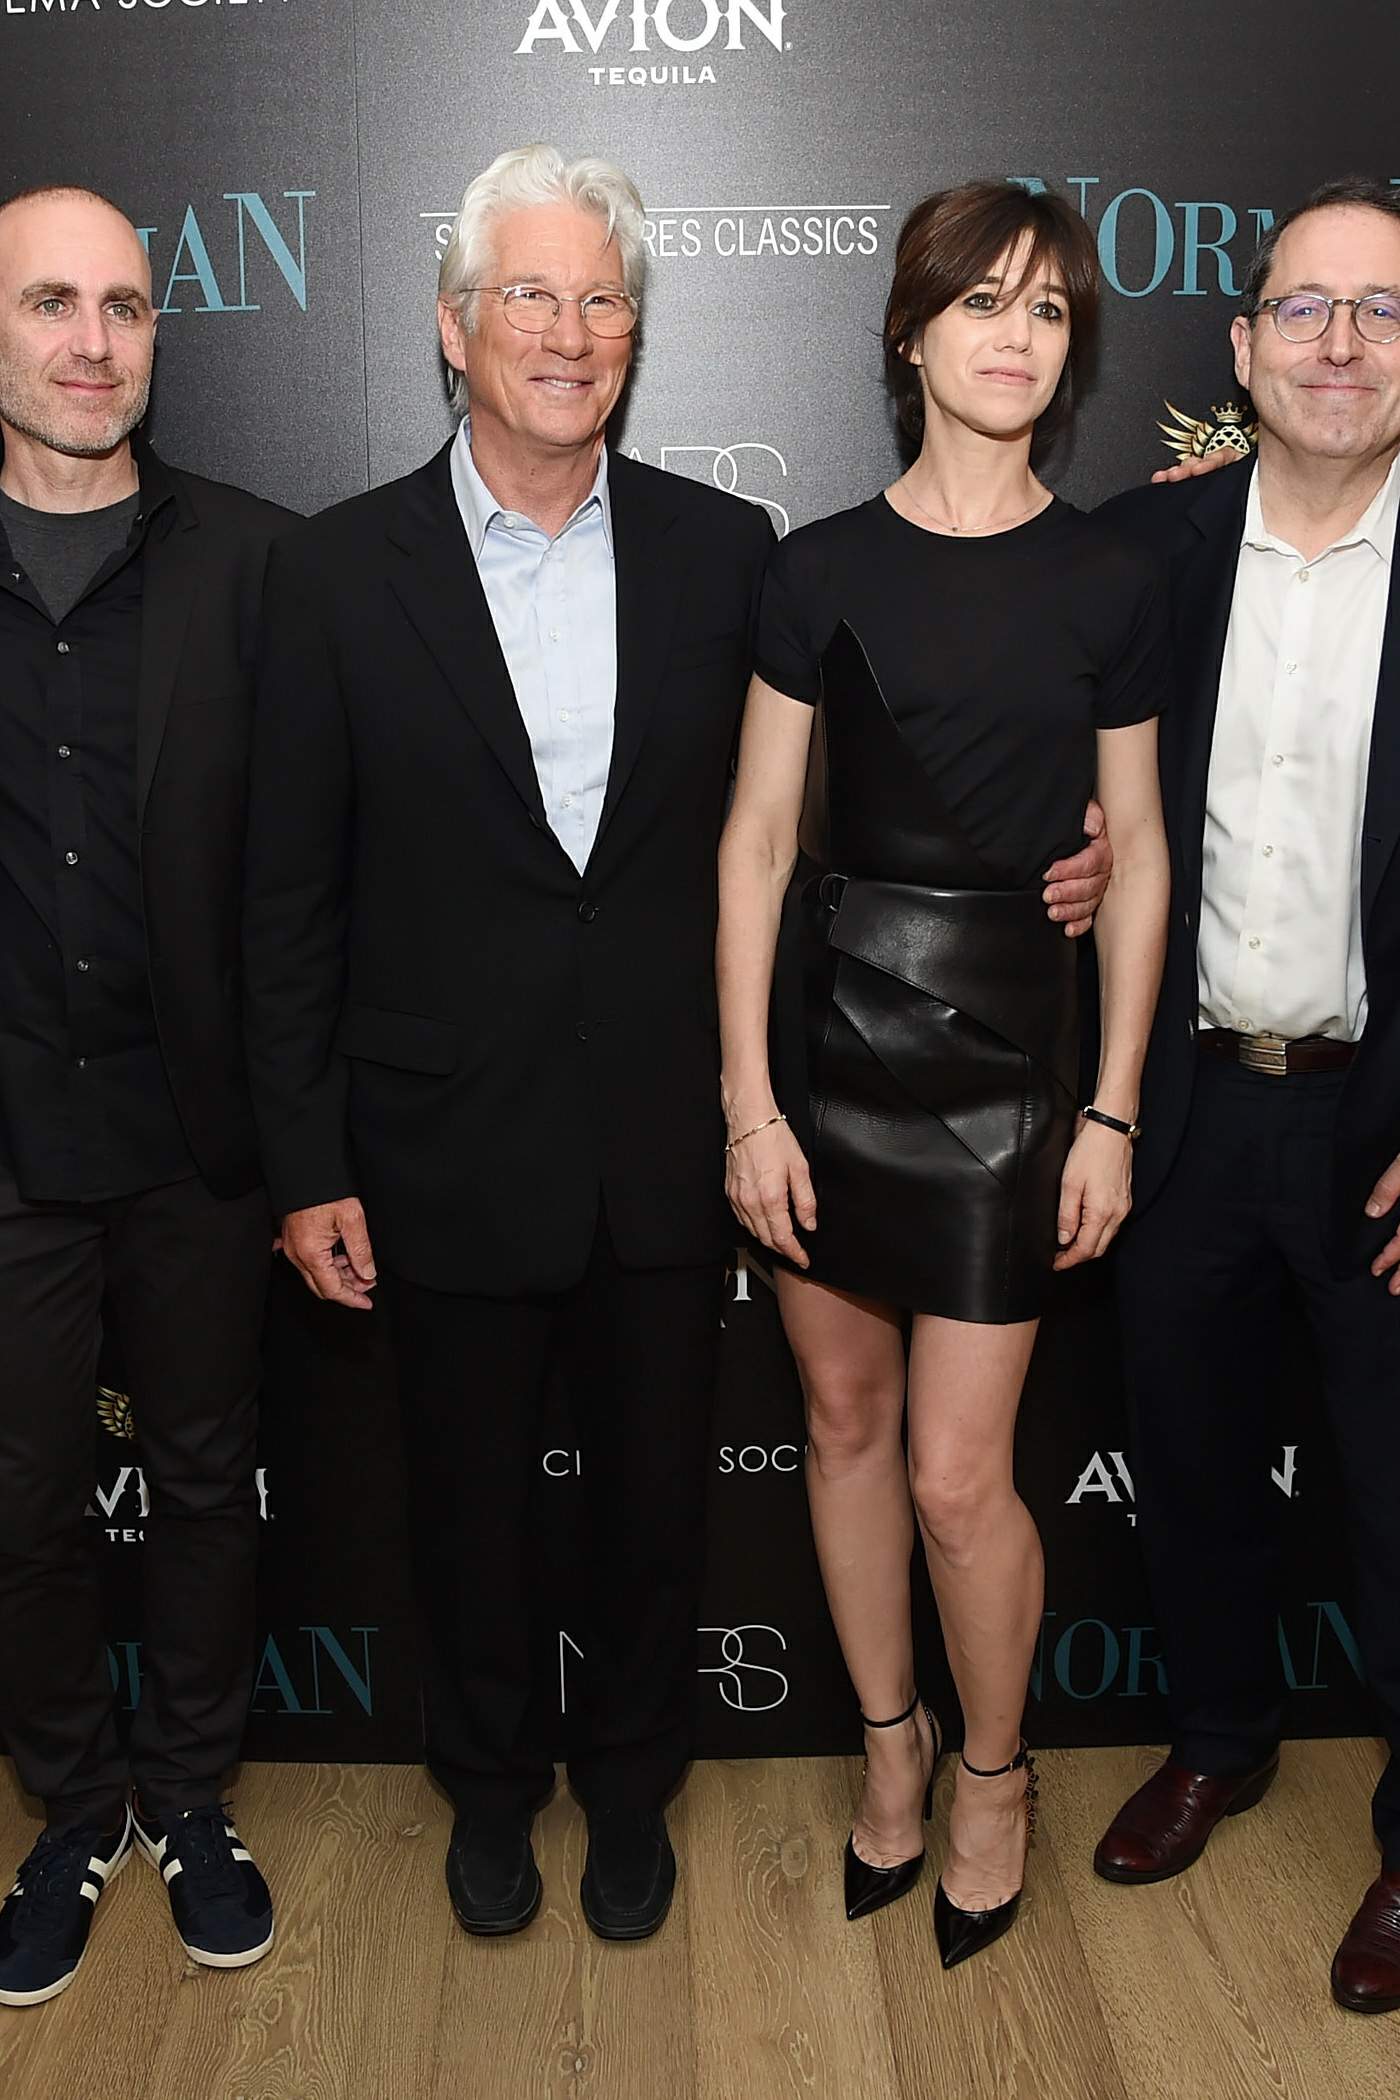 Charlotte Gainsbourg attends the premiere of Norman